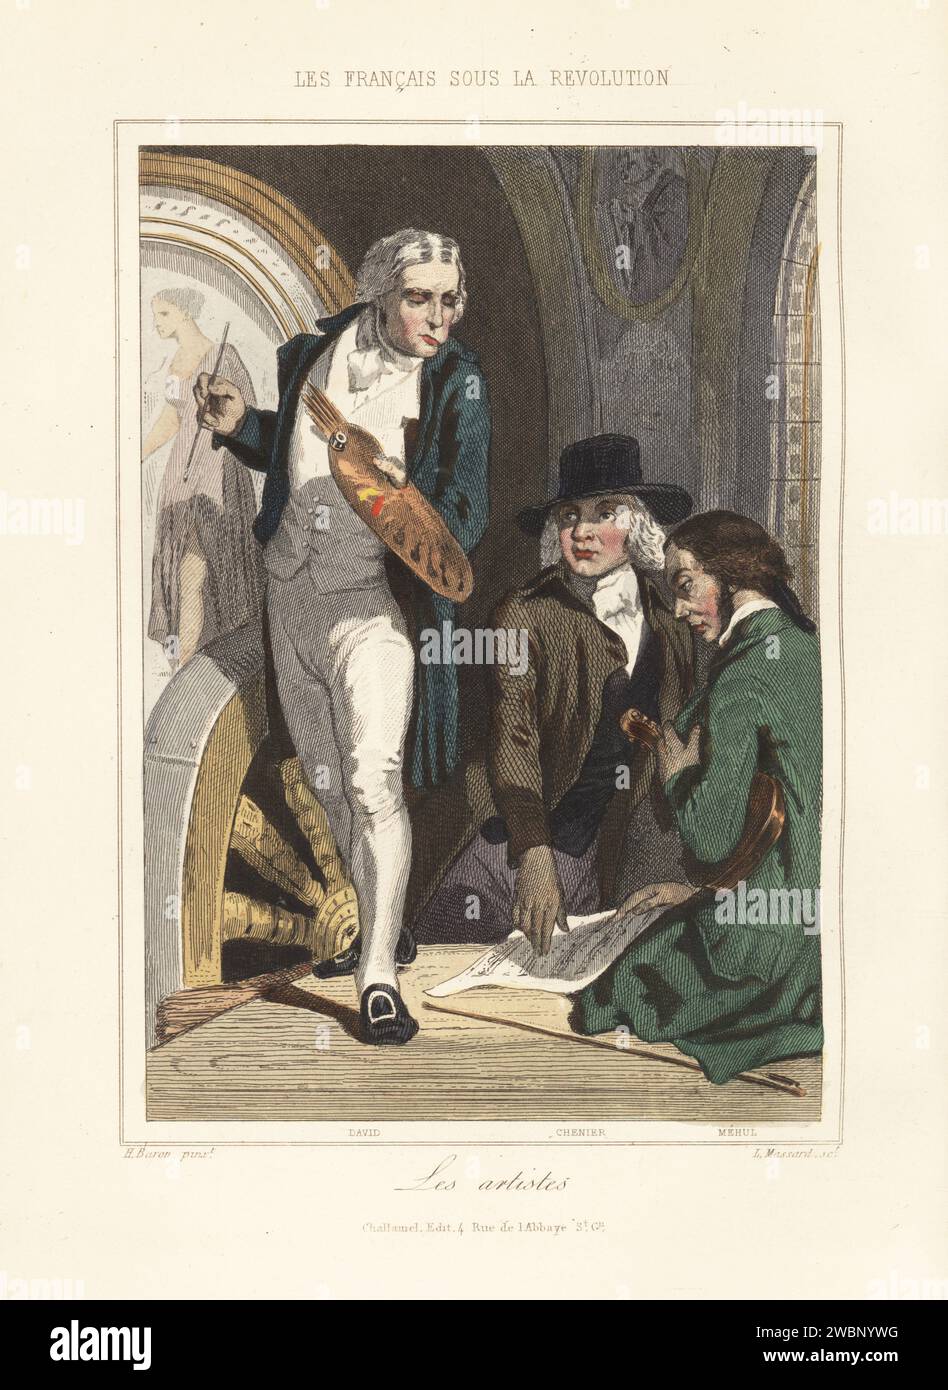 Painter Jacques-Louis David with easel and paint brushess, poet and dramatist Marie-Joseph Chenier pointing to music score, composer Etienne Mehul with violin. Les Artistes. Handcoloured steel engraving by Leopold Massard after an illustration by Henri Baron from Augustin Challamel and Wilhelm Tenint’s Les Francais sous la Revolution, The French under the Revolution, Challamel, Paris, 1843. Stock Photo